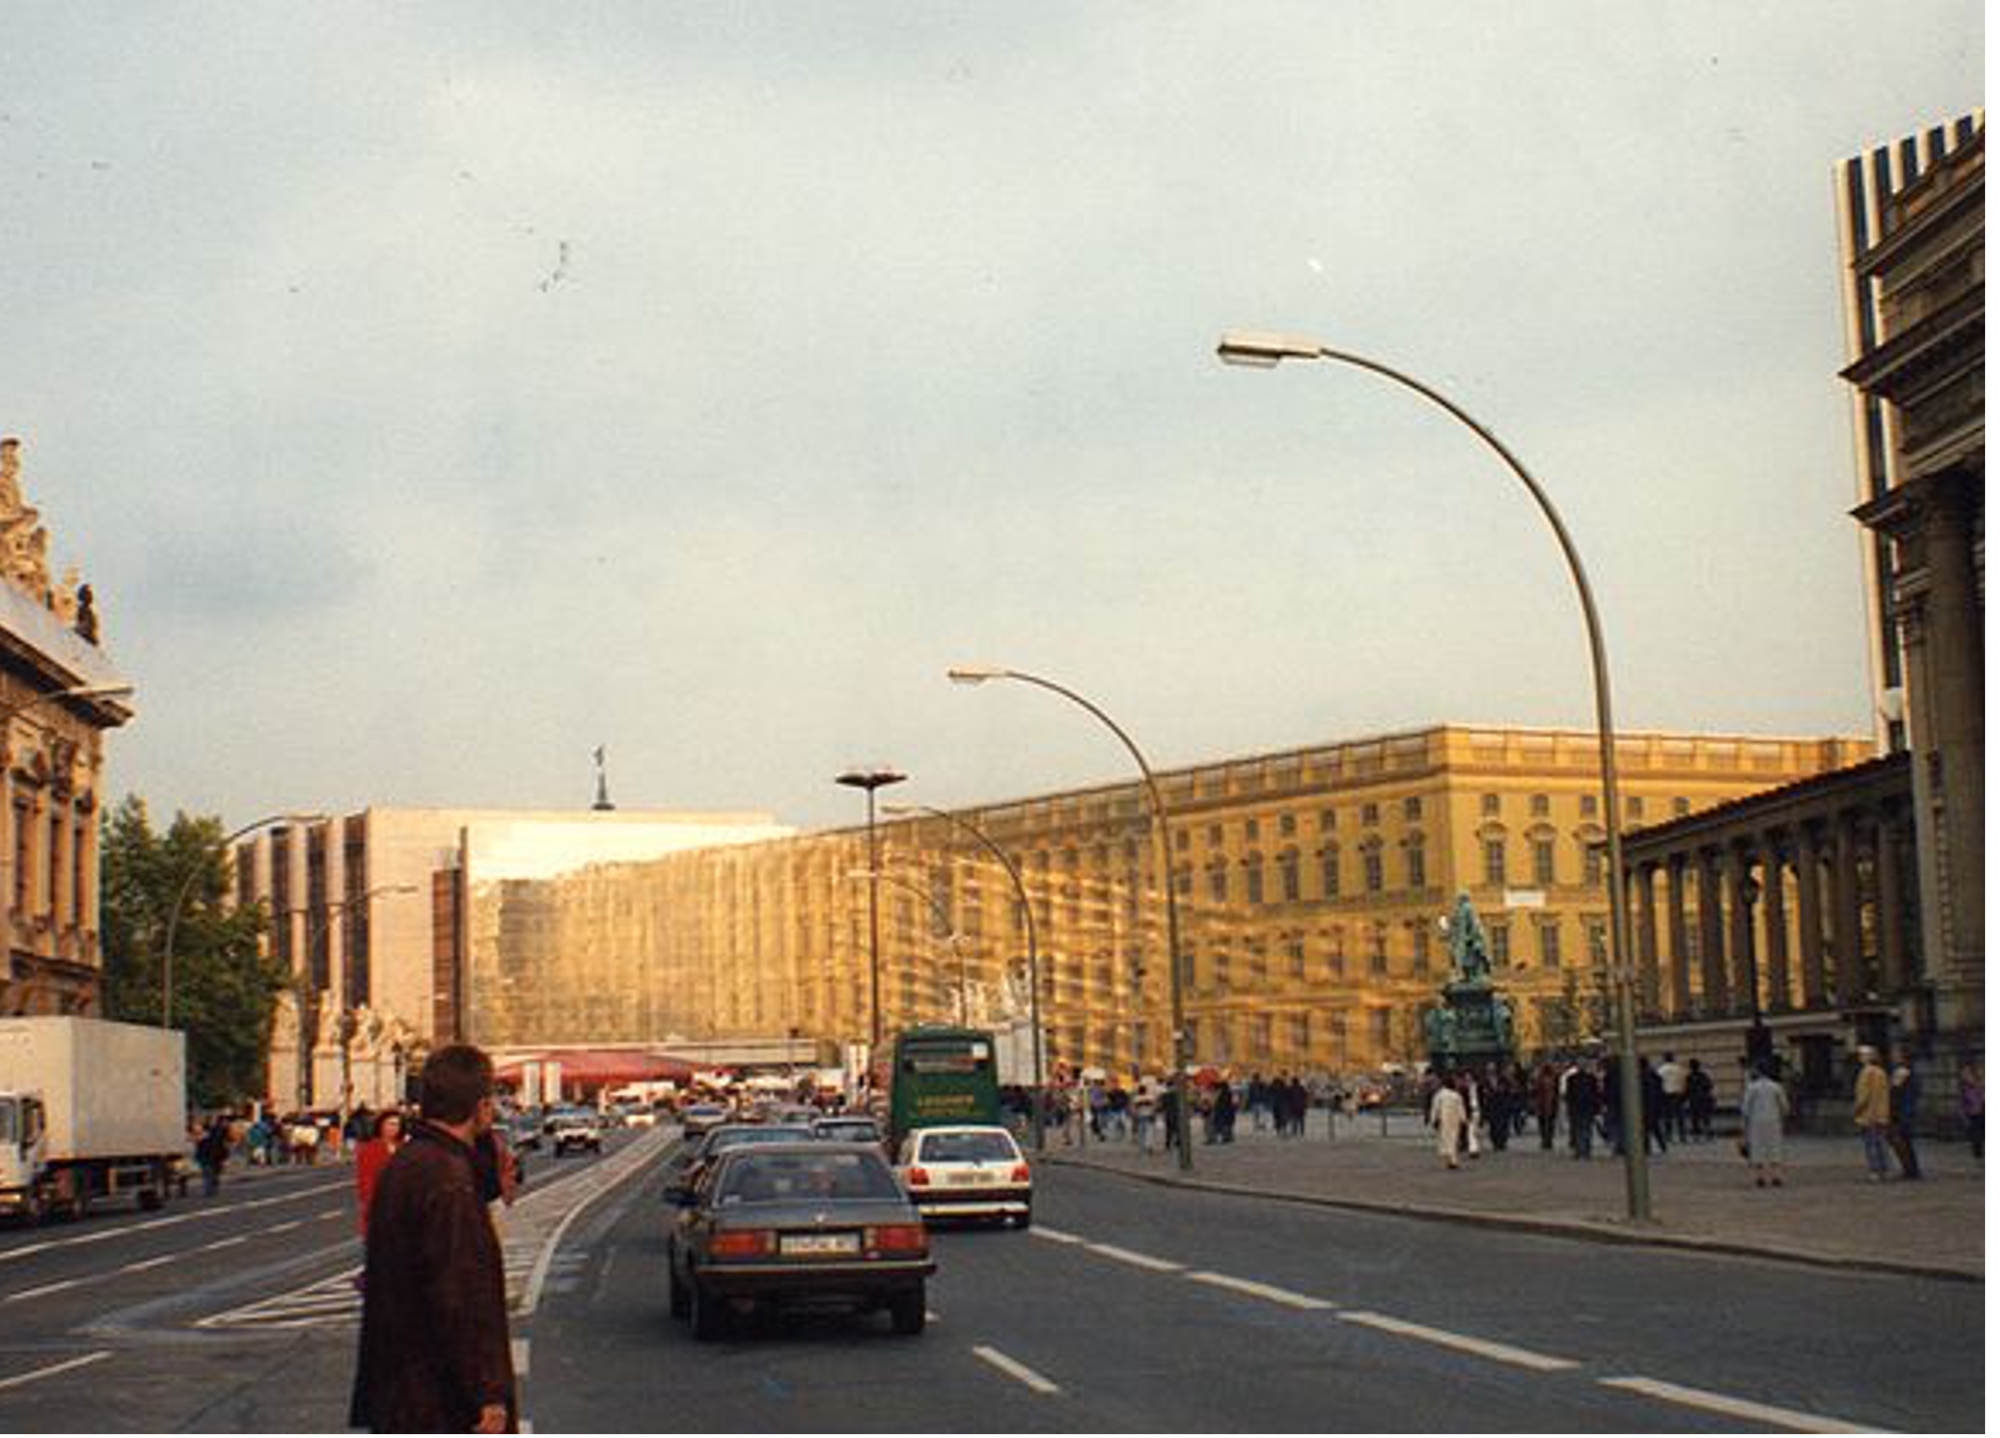 Image 2. Evoking ghosts through urban hyperstitions: the replica of the Stadtschloss in front of the Palast der Republik after completition. Source: Robert Schediwy.